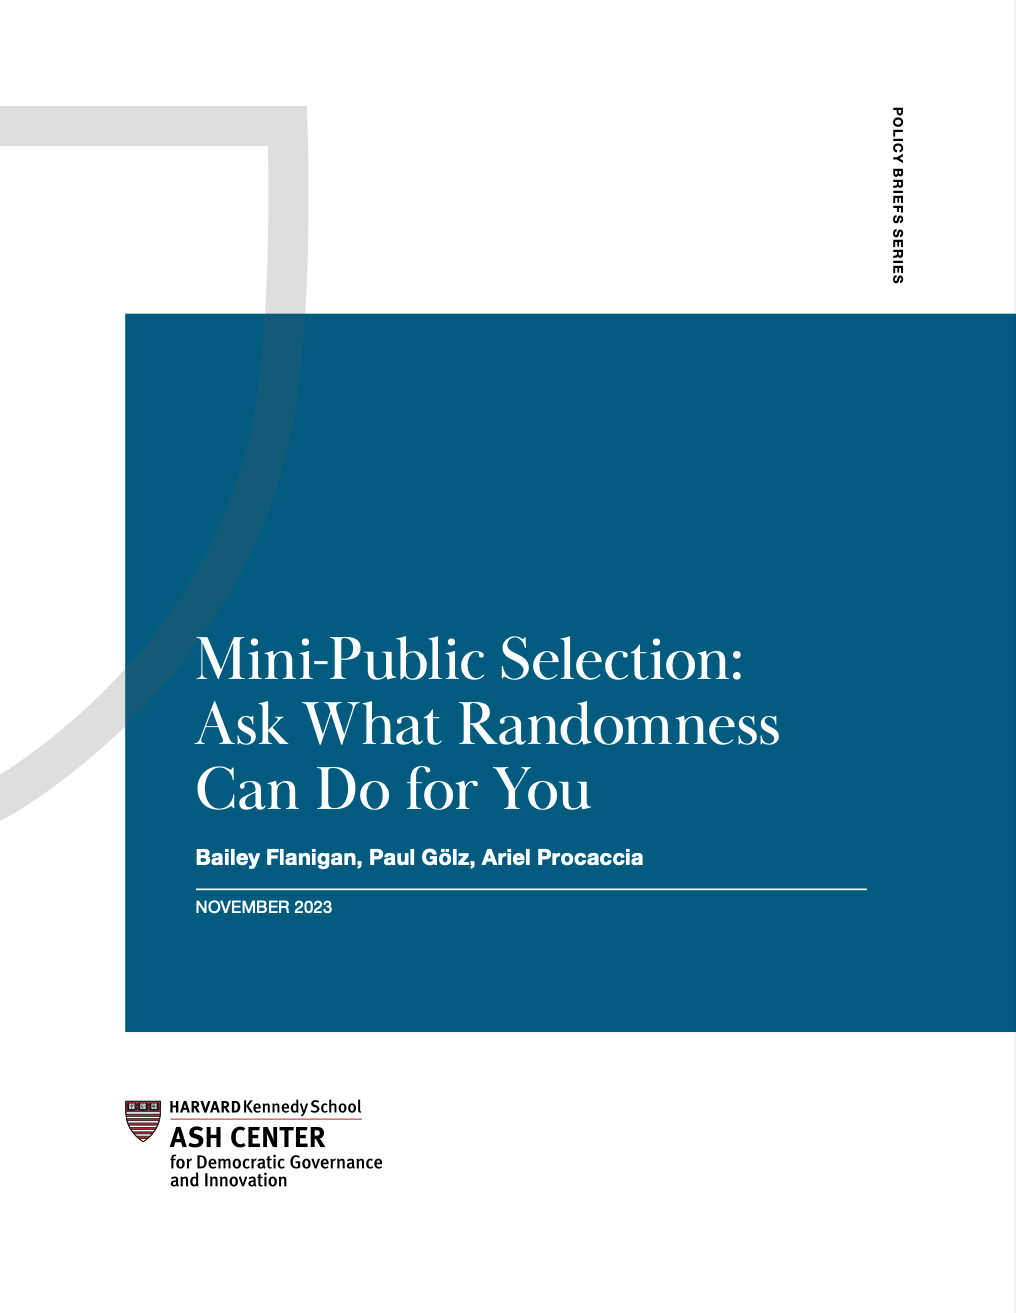 Mini-Public Selection: Ask What Randomness Can Do for You